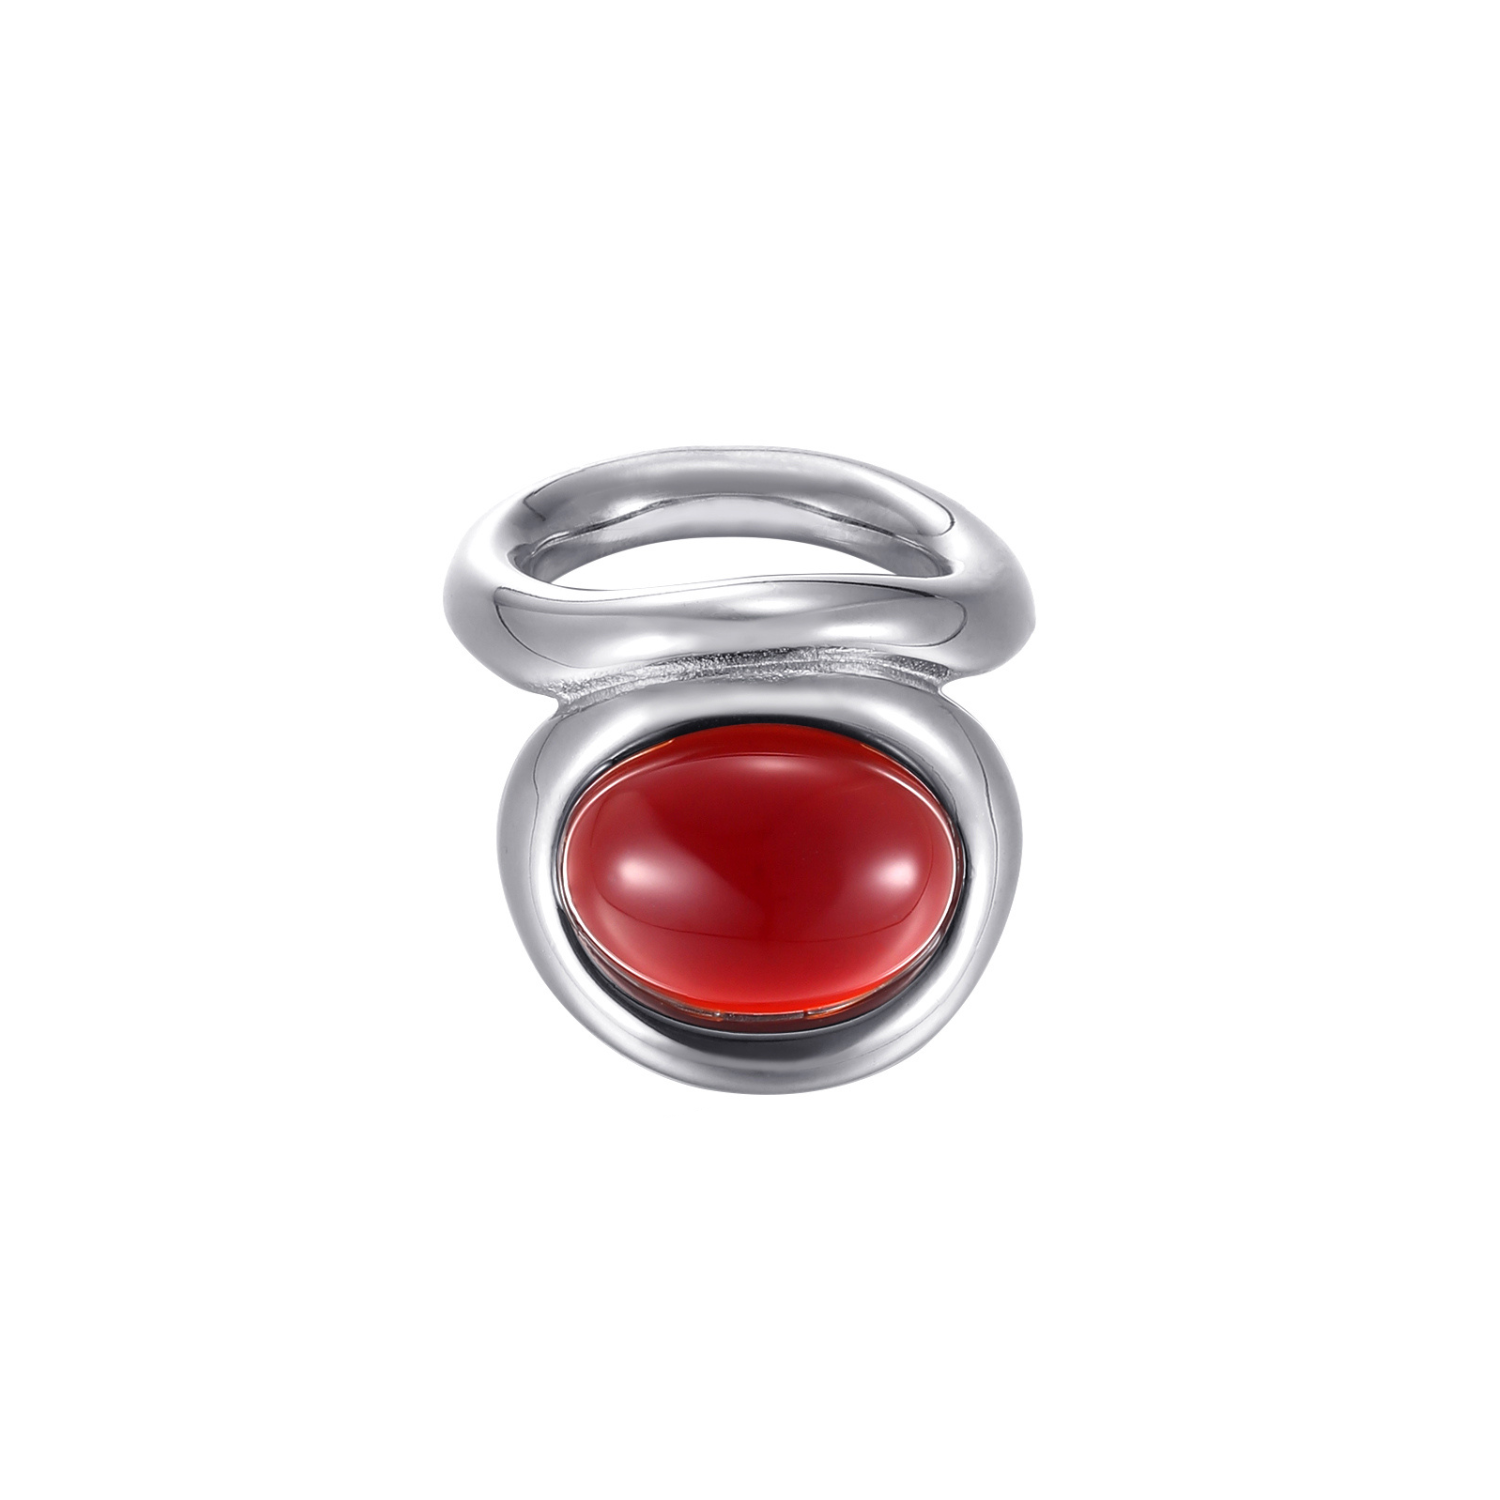 STATEMENT COCKTAIL RING. RED